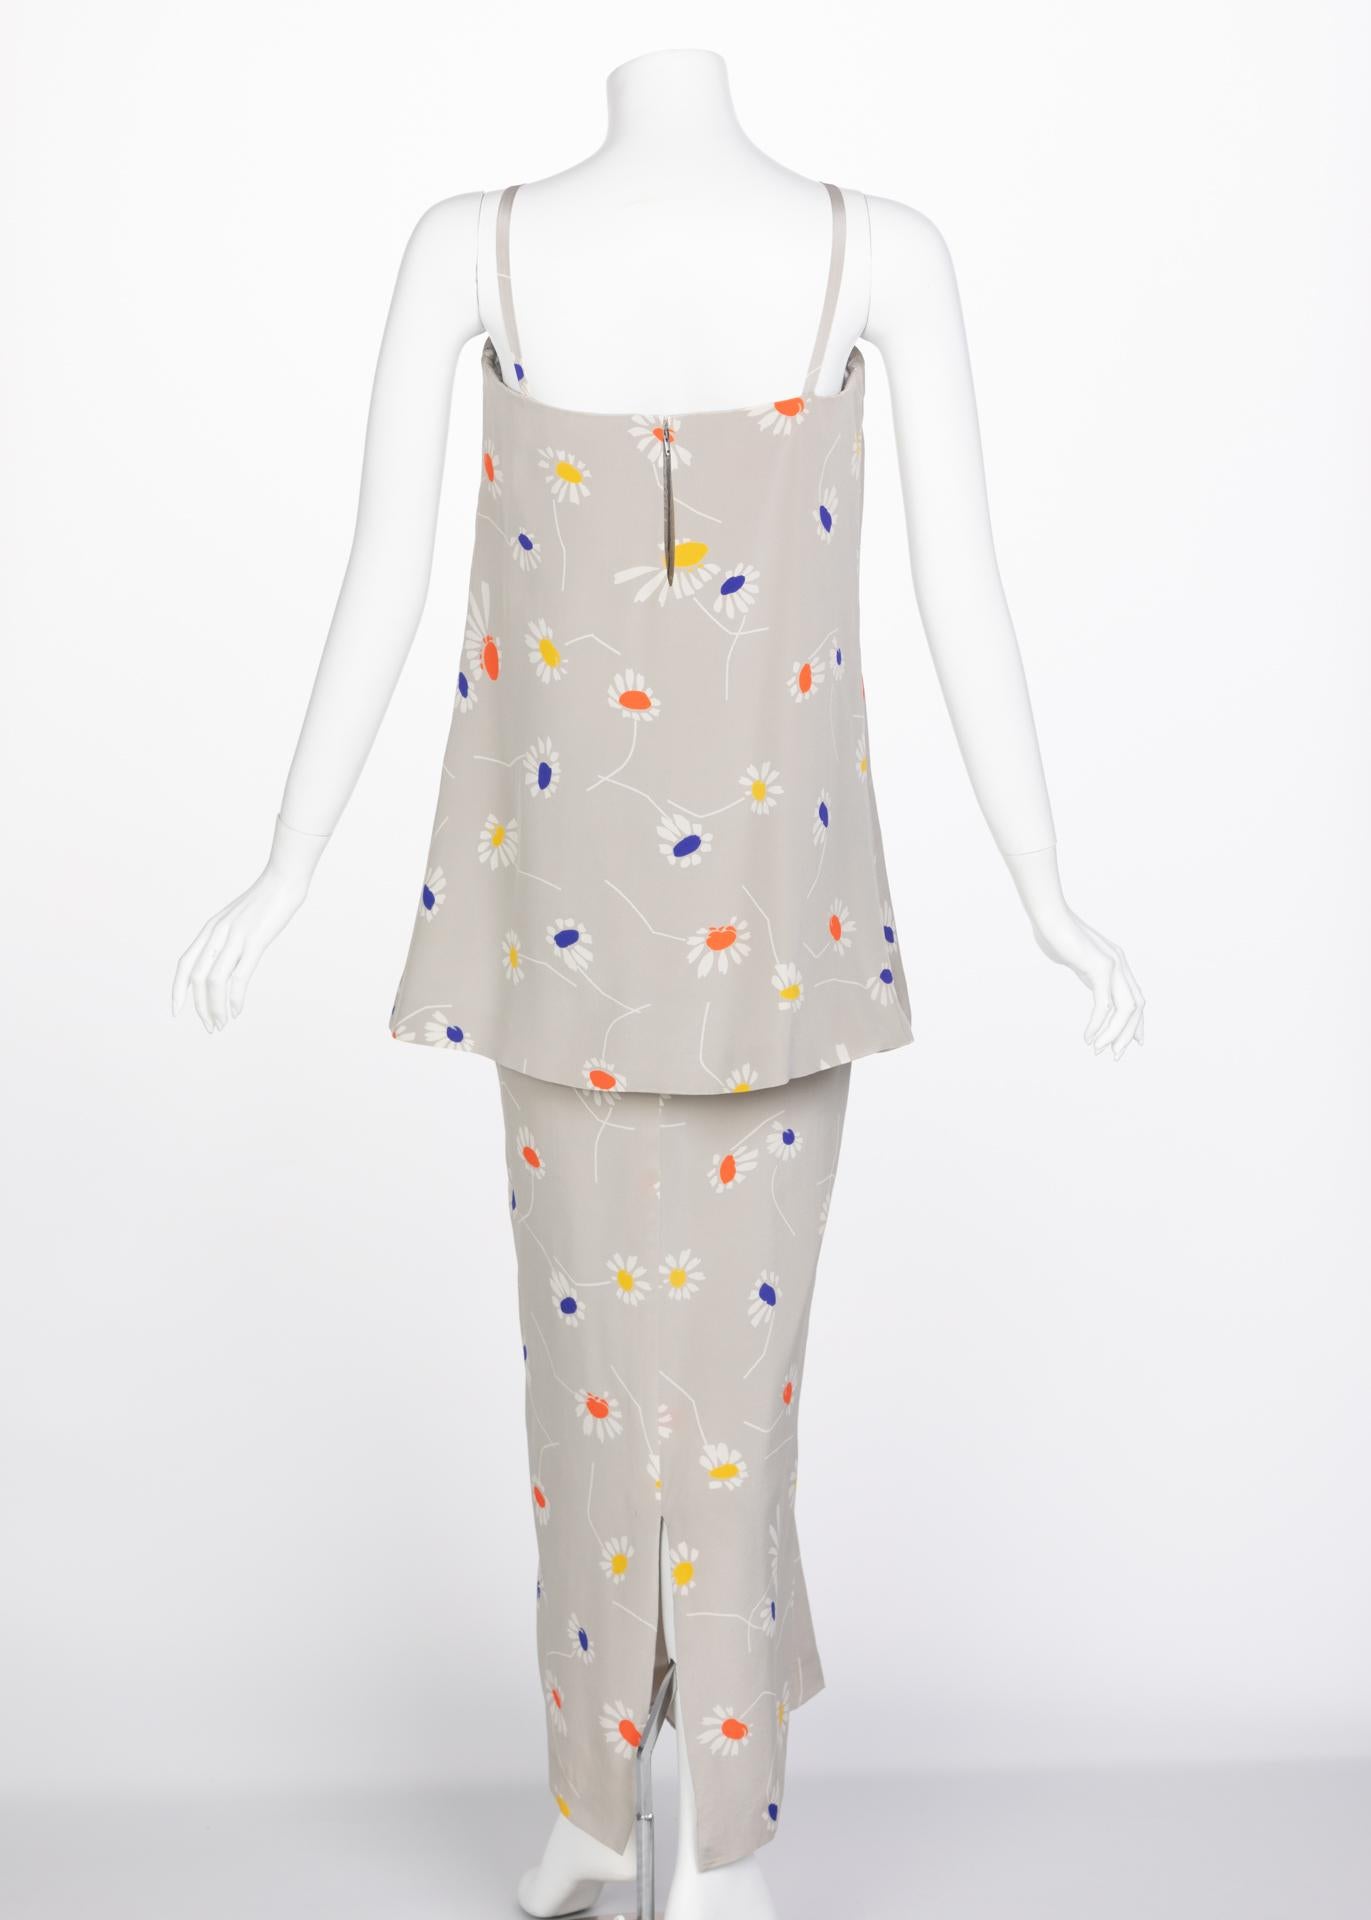 Gray Chloé by Karl Lagerfeld Grey Floral Silk Maxi Dress, 1980s For Sale